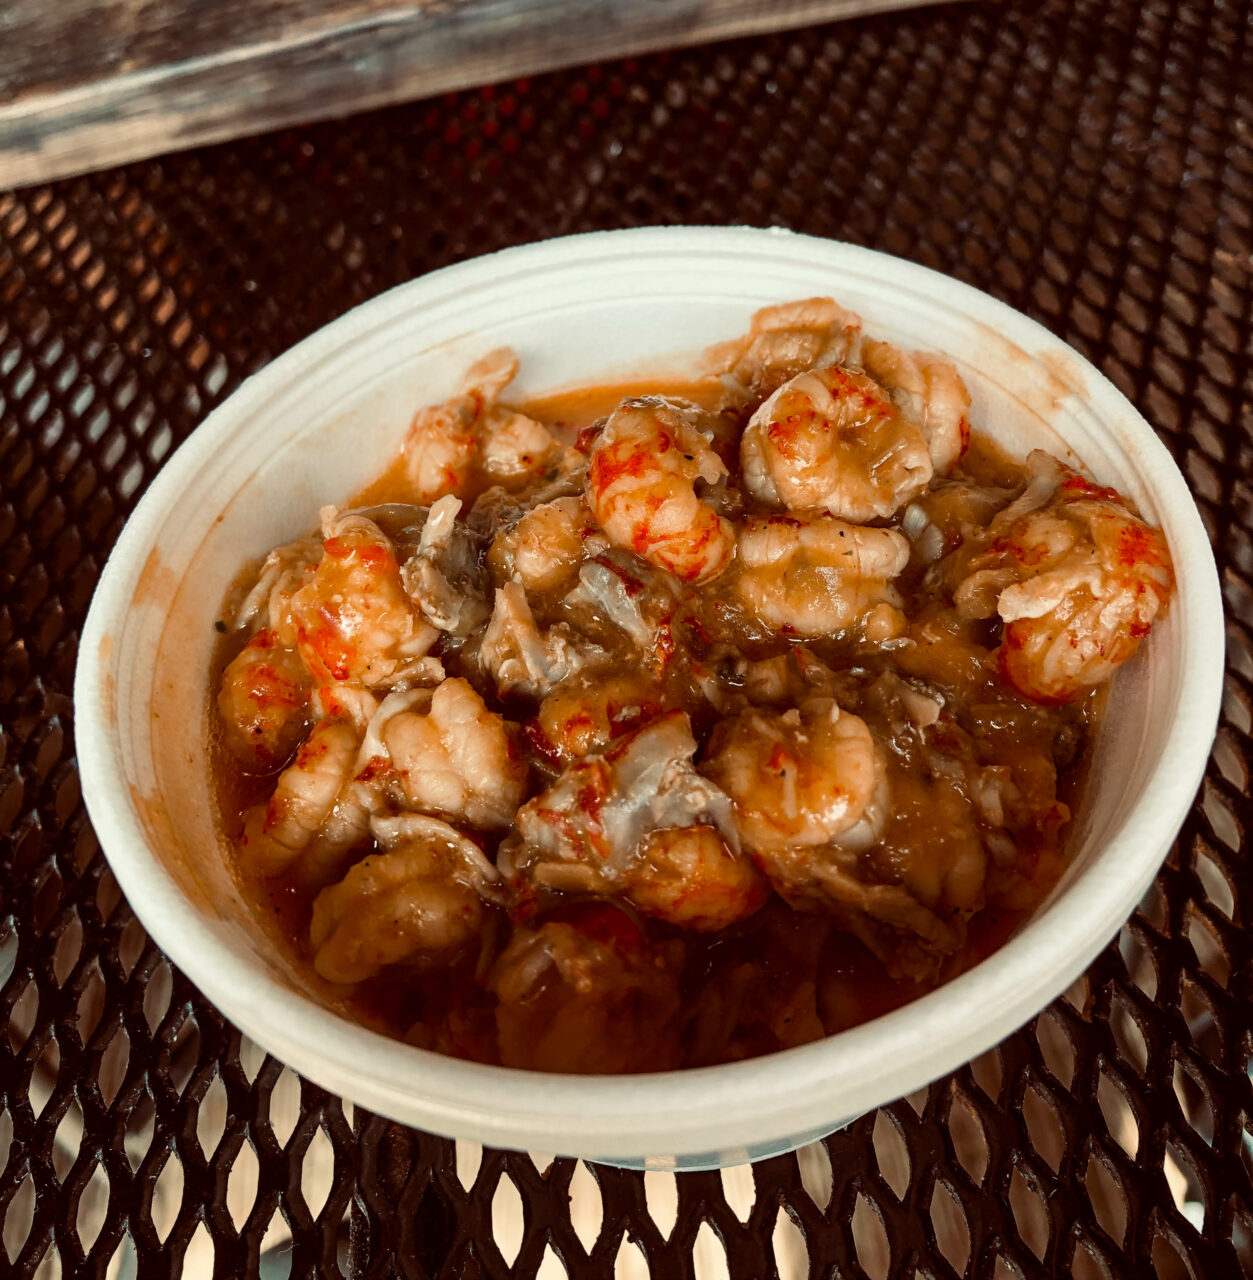 A bowl of crayfish étouffée, one of the Cajun dishes served during the Tabasco tasting experience.